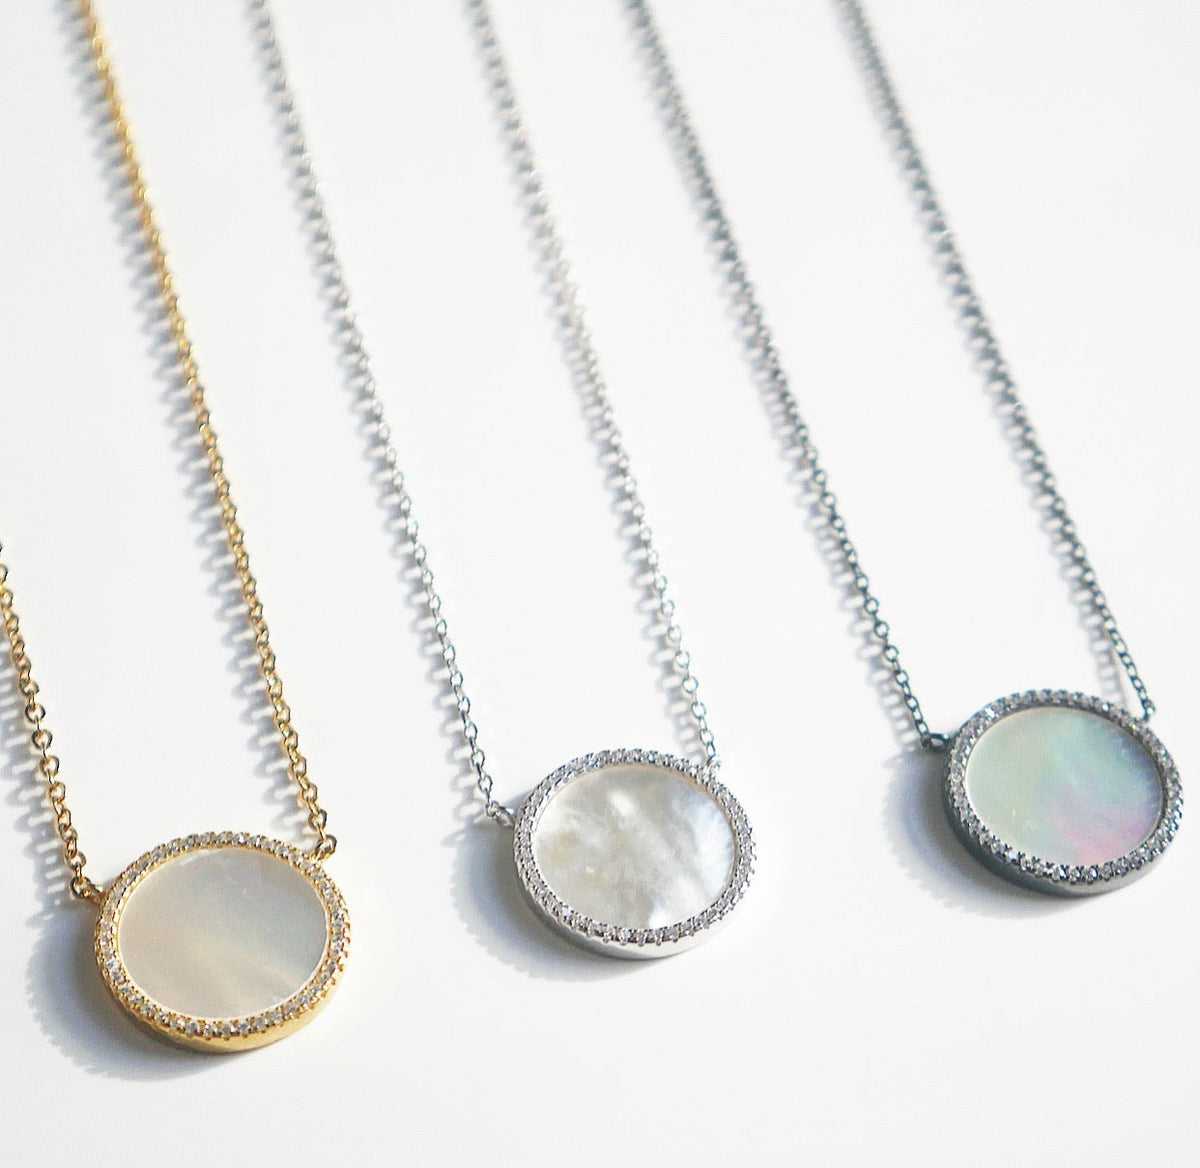 mother of pearl necklaces waterproof unique pearl necklaces for men and woman june birthstone necklaces dainty sterling silver 925 shopping in Miami jewelry store in Brickell Kesley Boutique 